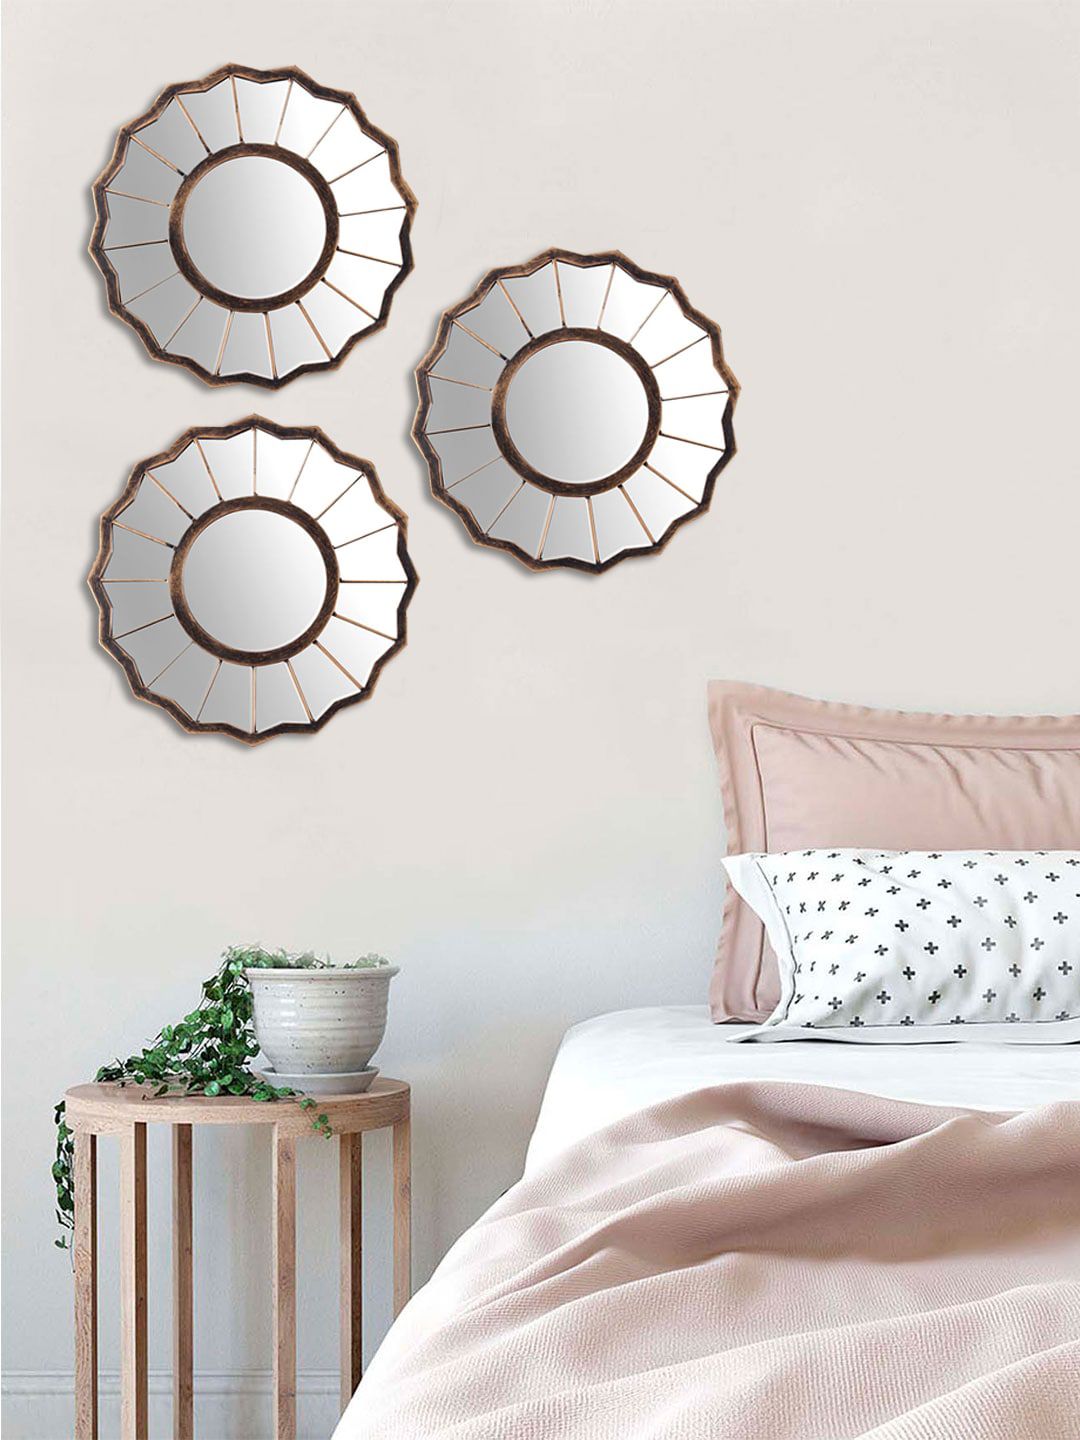 Art Street Set Of 3 Copper-Toned Decorative Wall Mirrors Price in India